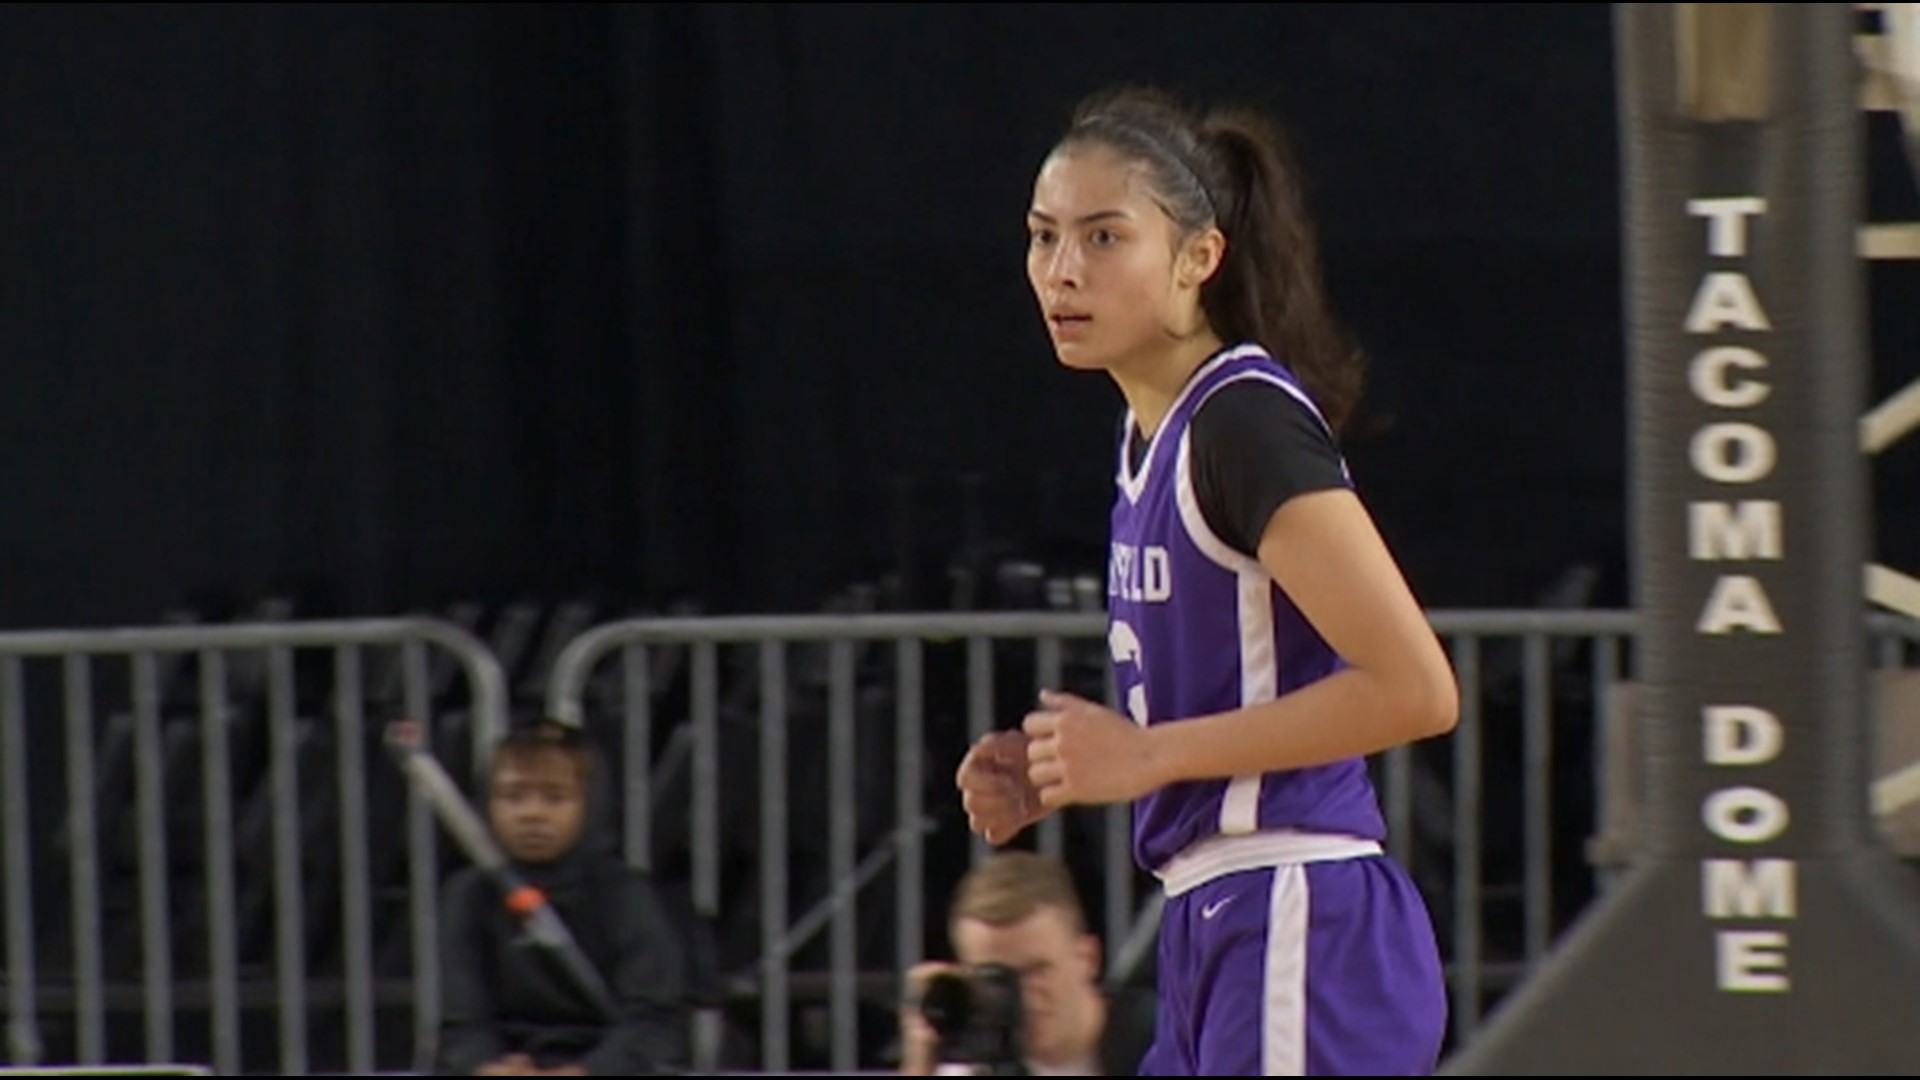 Highlights of the Garfield girls 62-45 win over Lakeside in the 3A State Semifinals